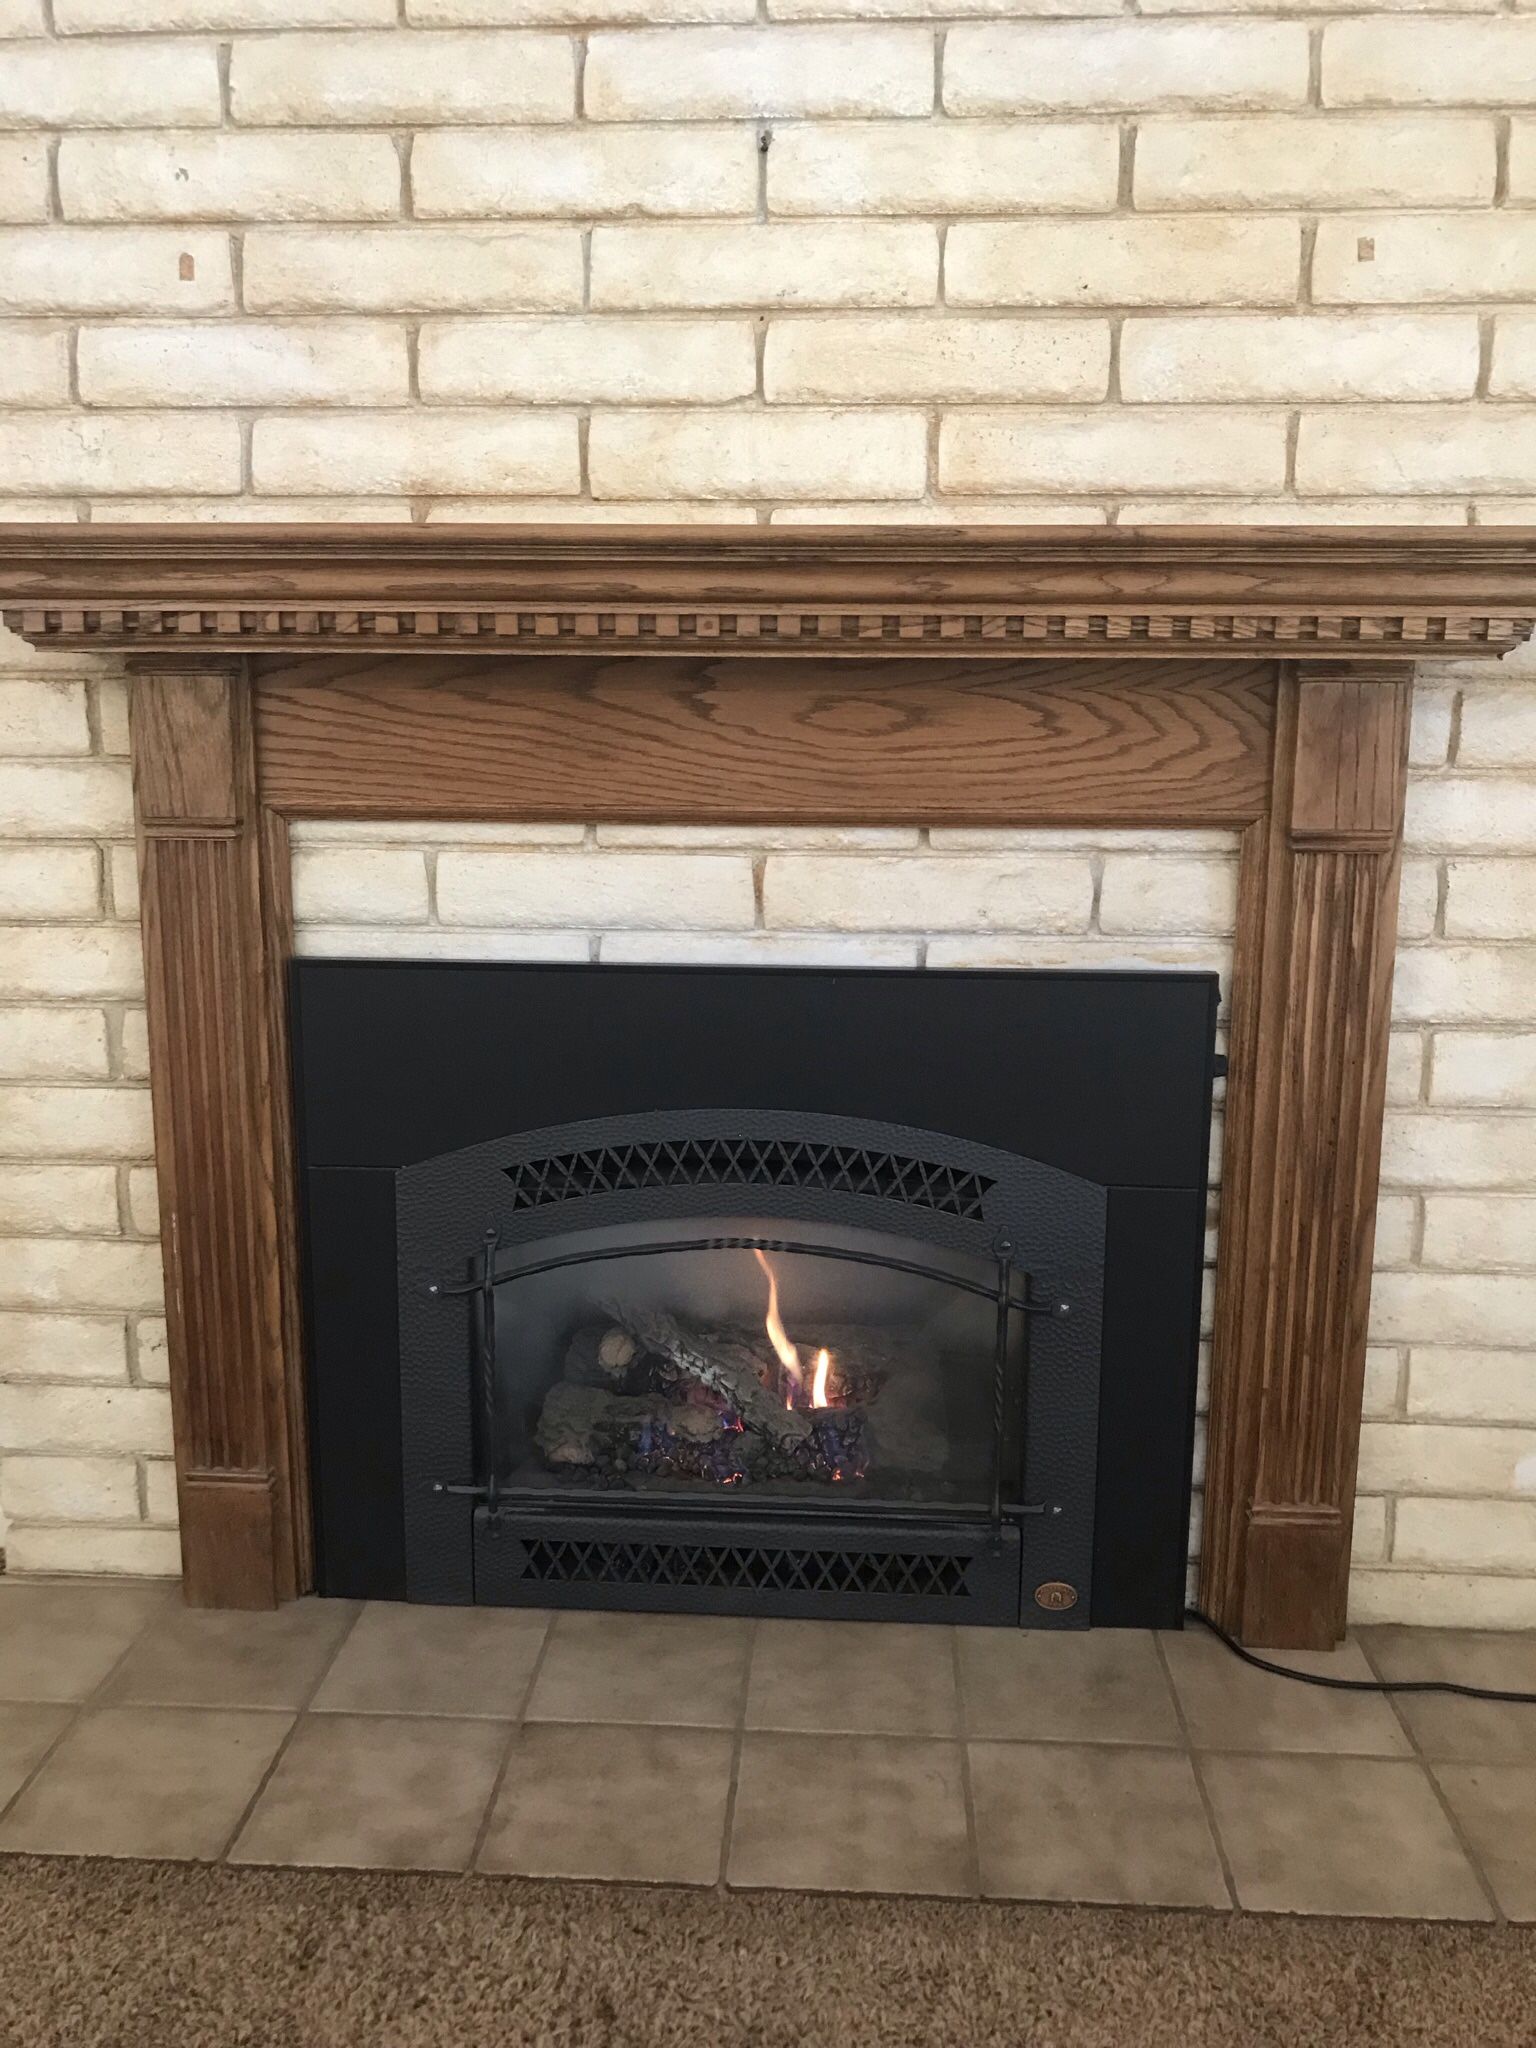 Gas Fireplace Insert With Fan. Thermostat Controlled. 